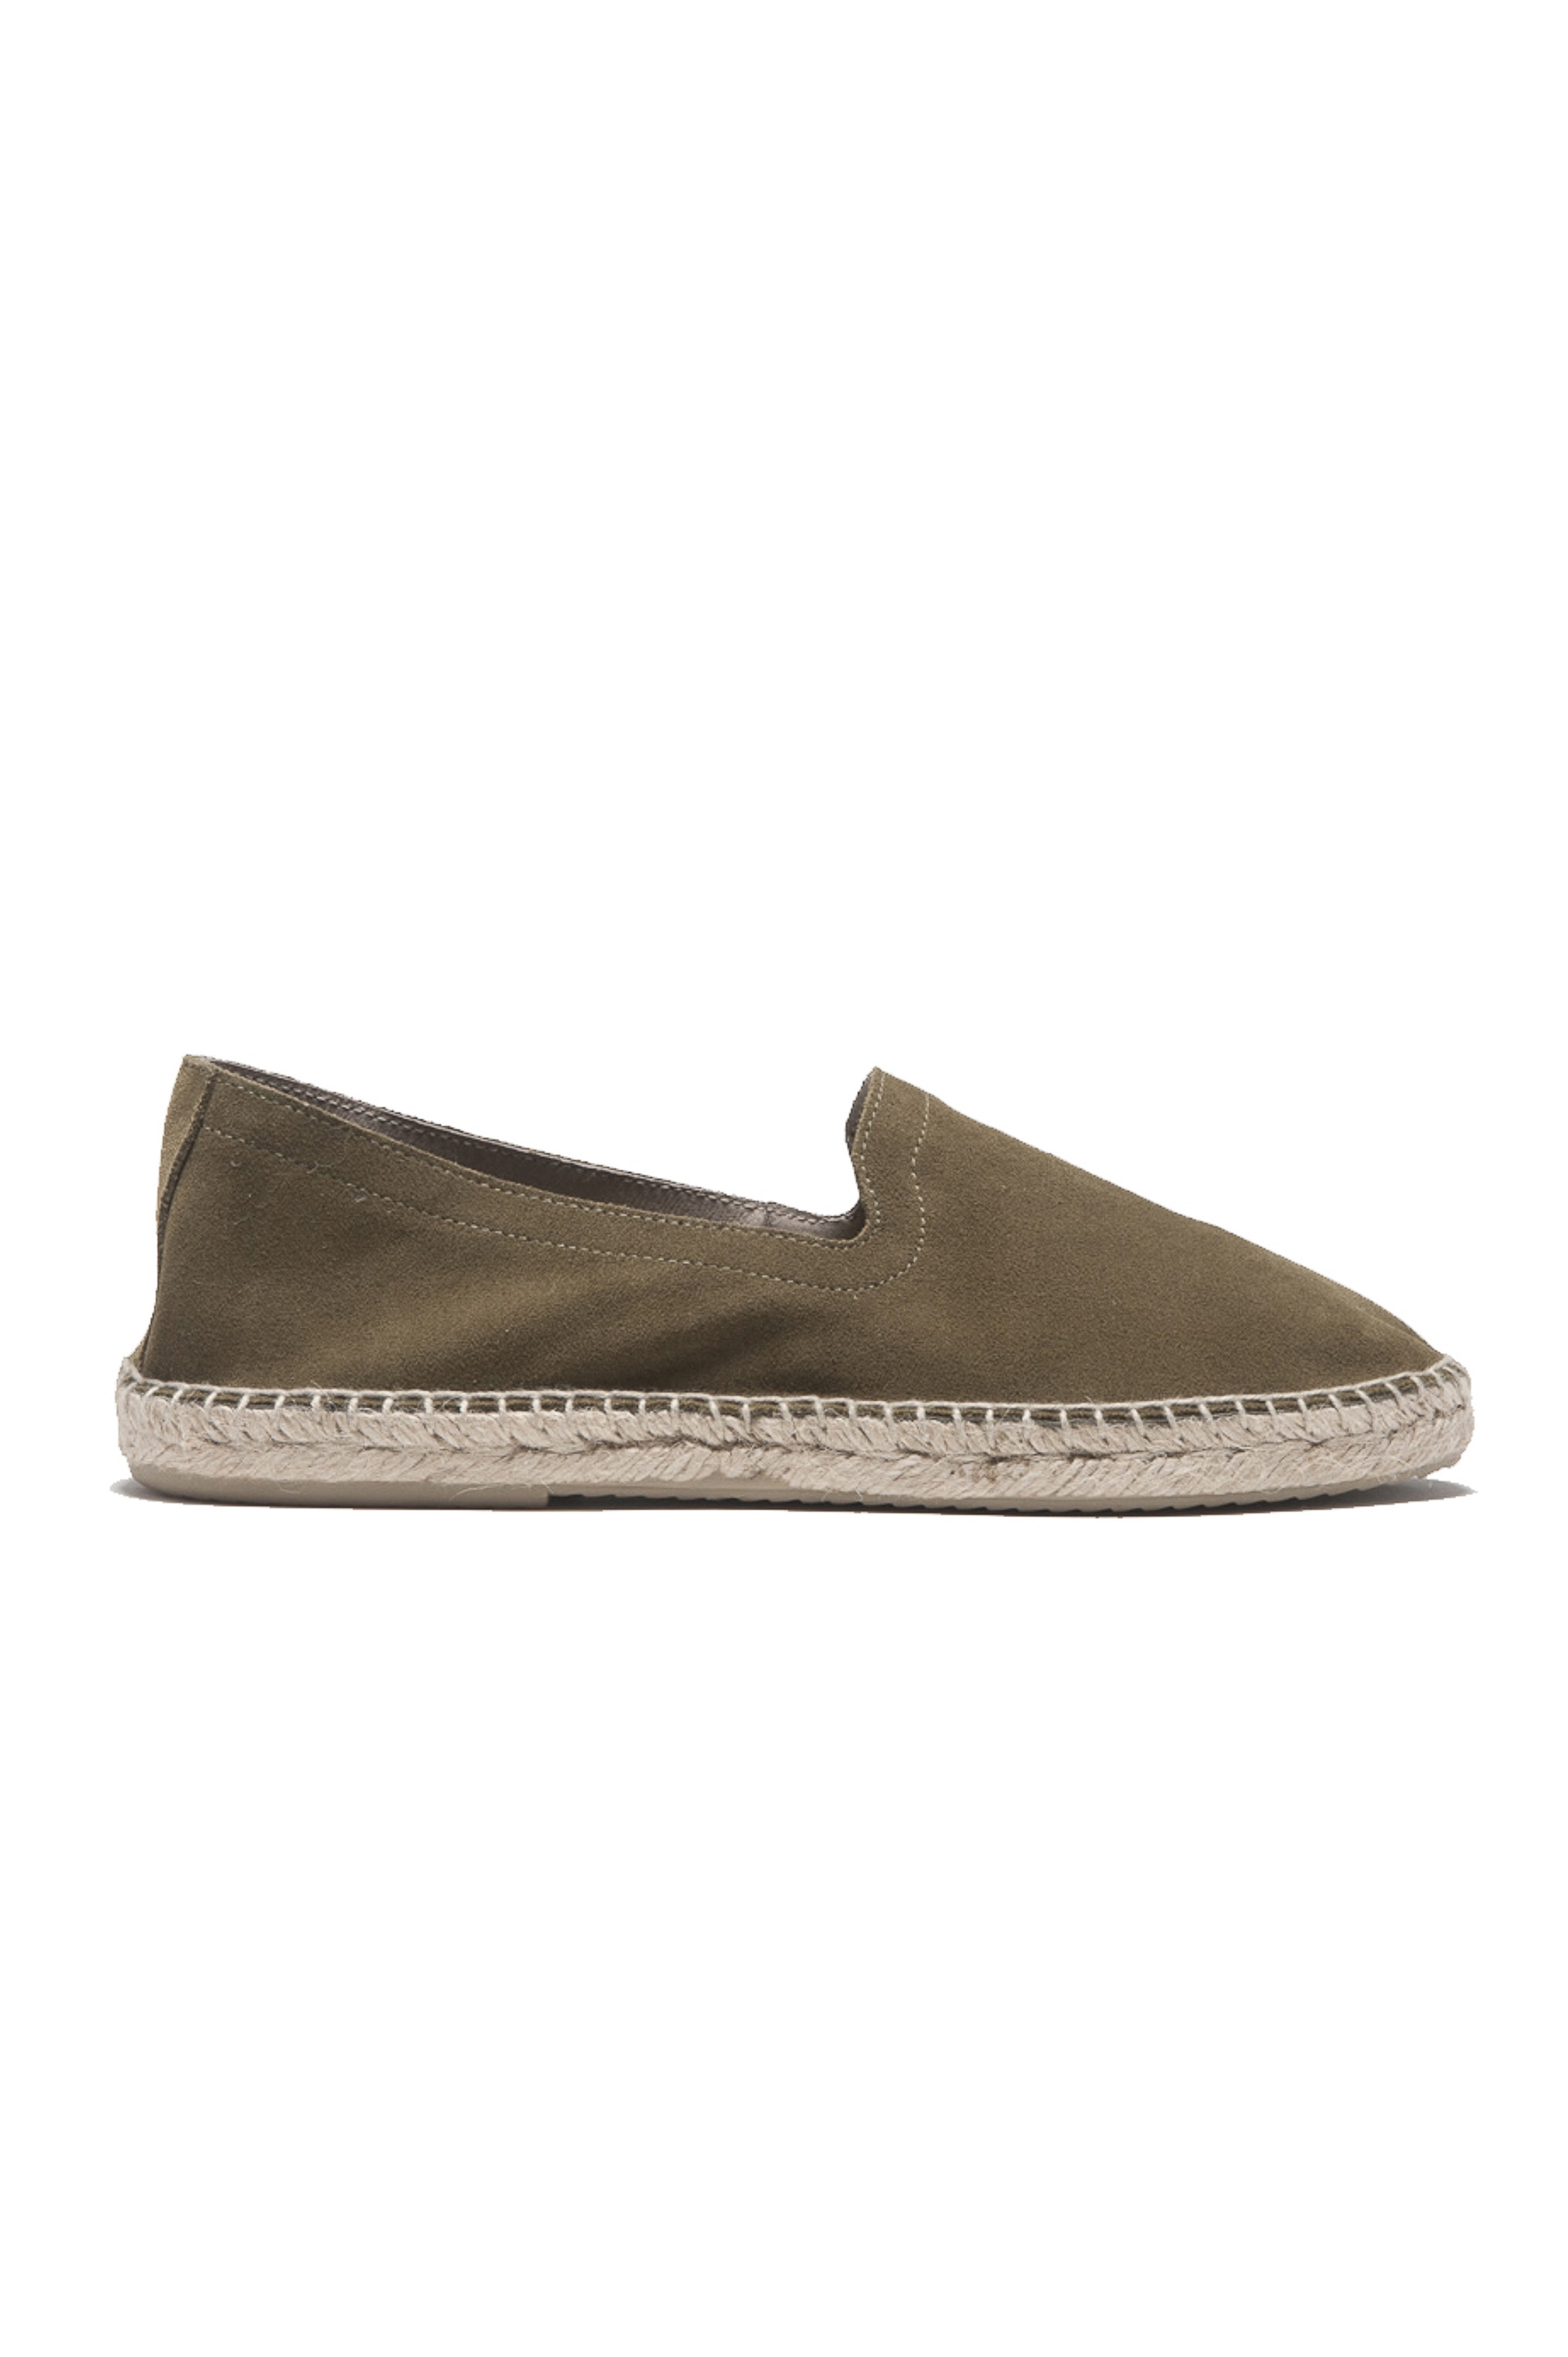 SBU 01703 Original green suede leather espadrilles with rubber sole 01